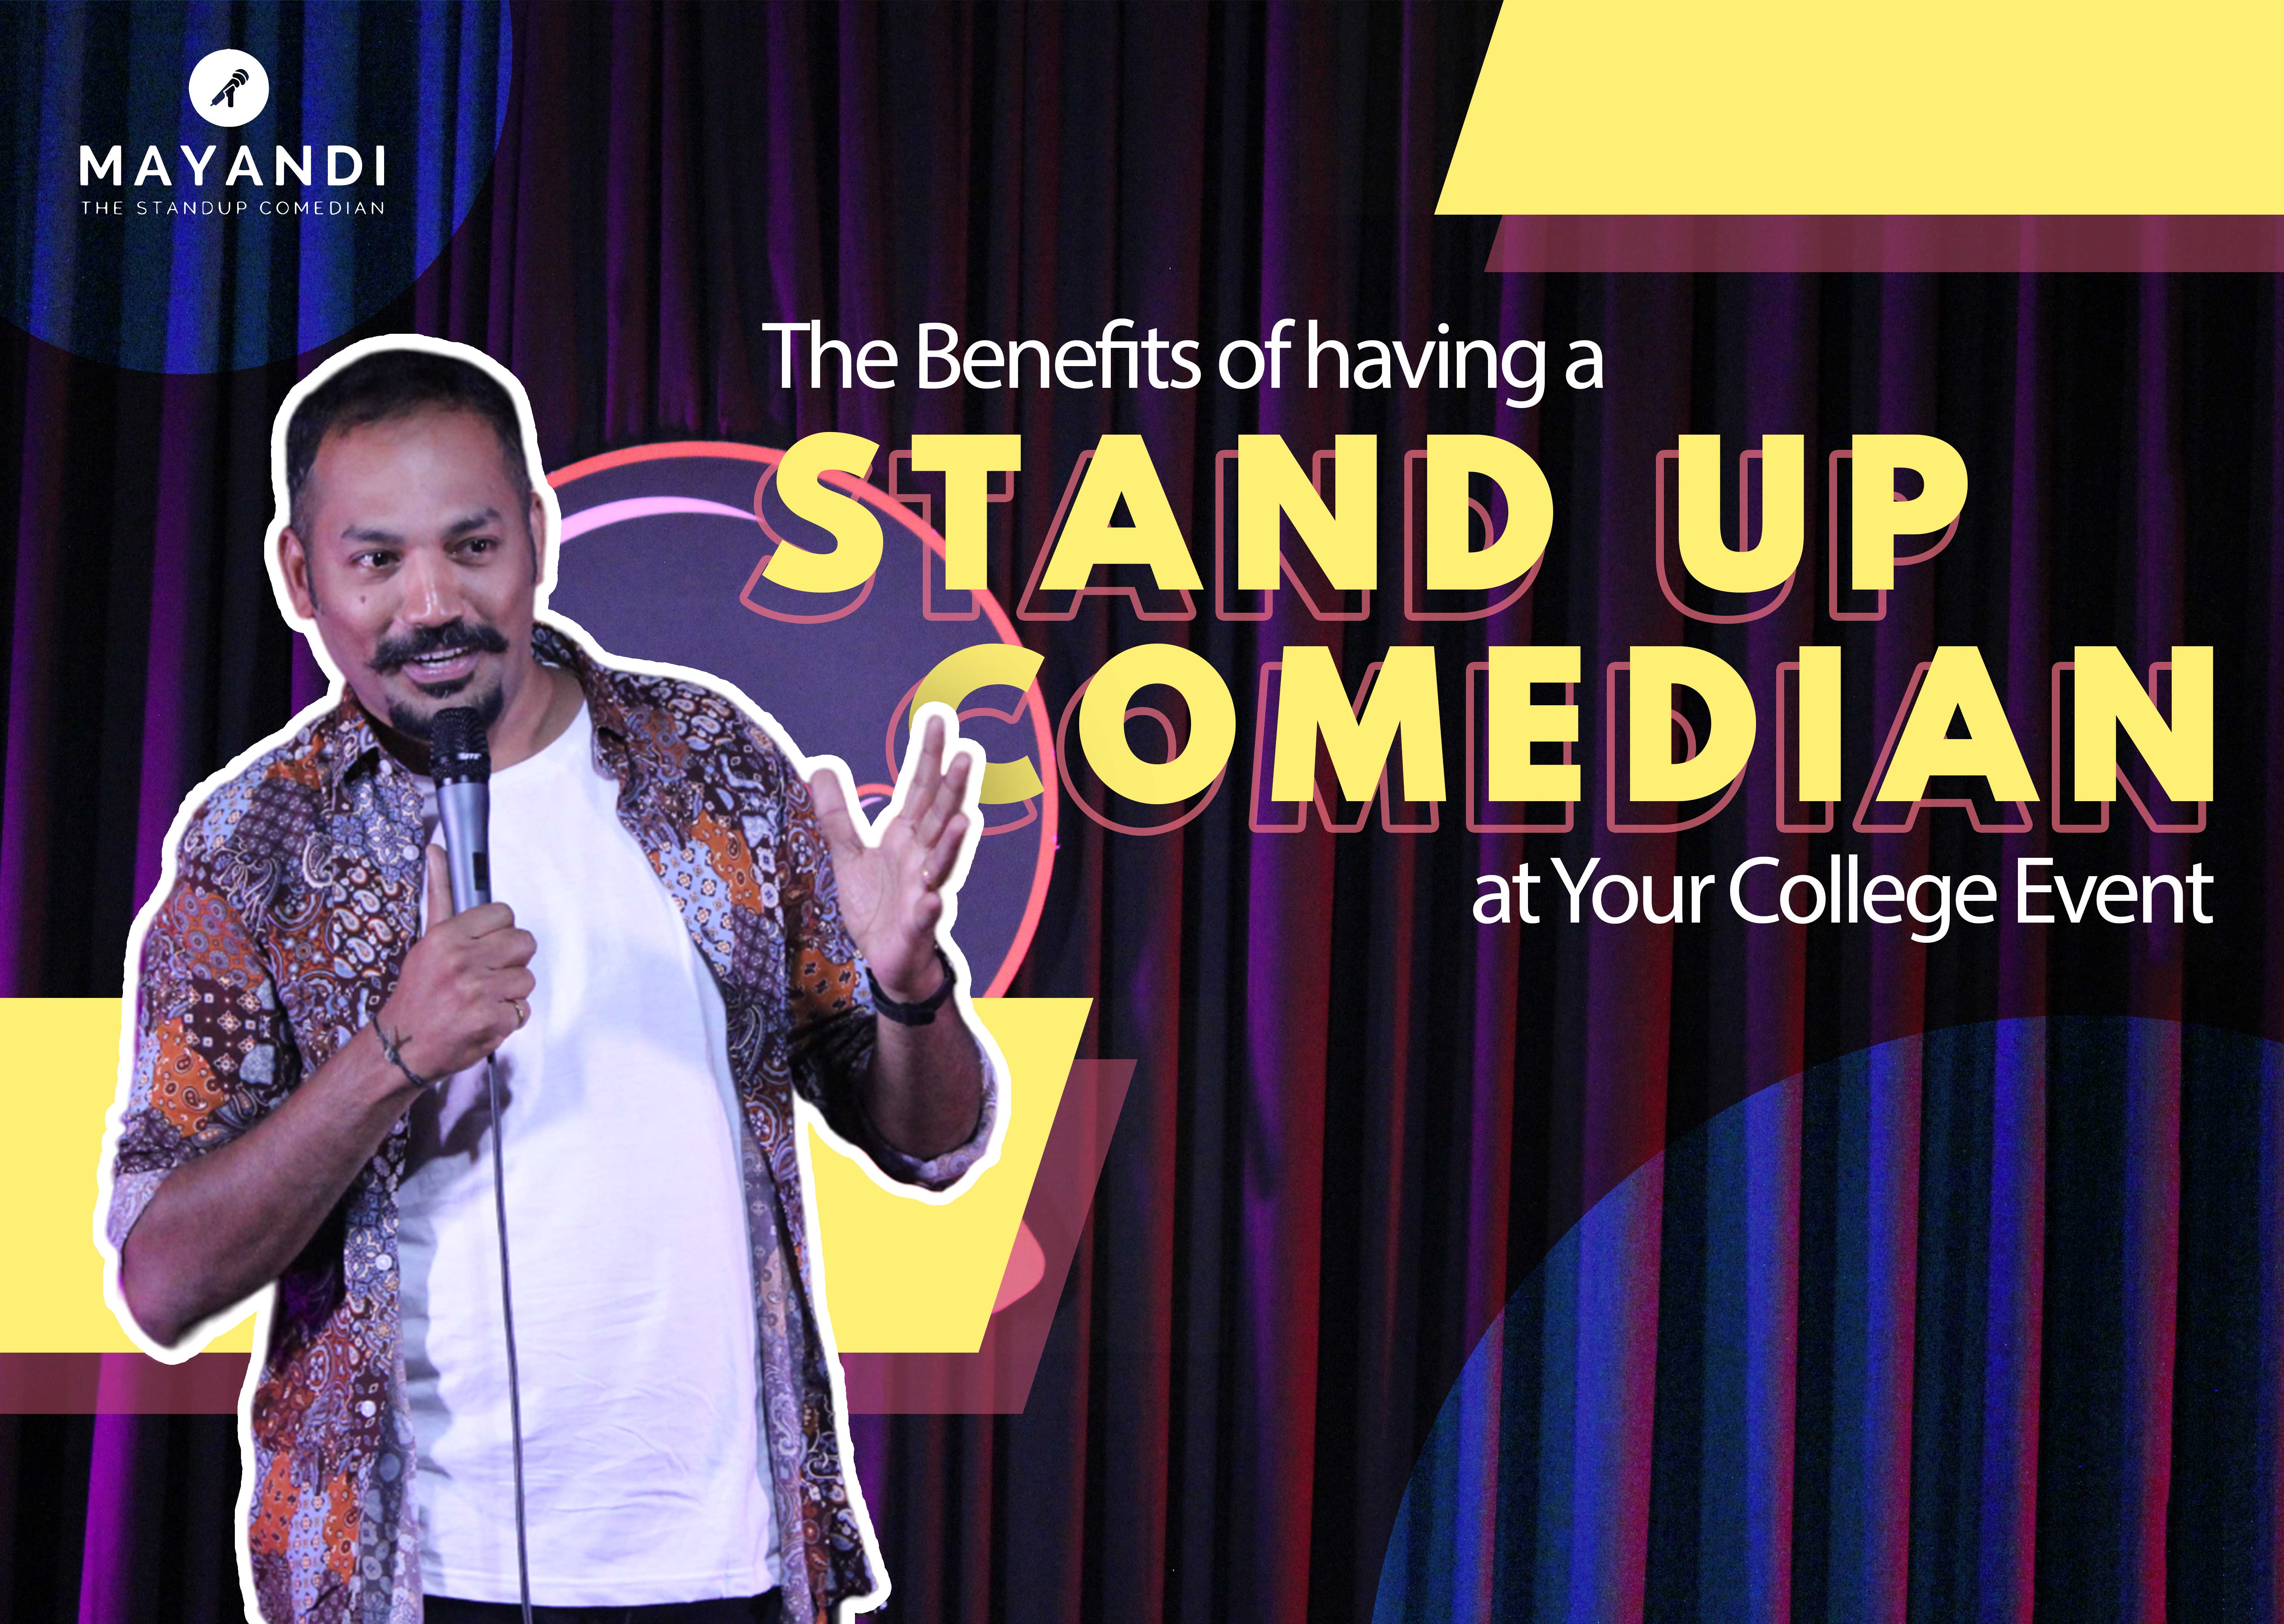 The Benefits Of Having A Stand-Up Comedian At Your College Event